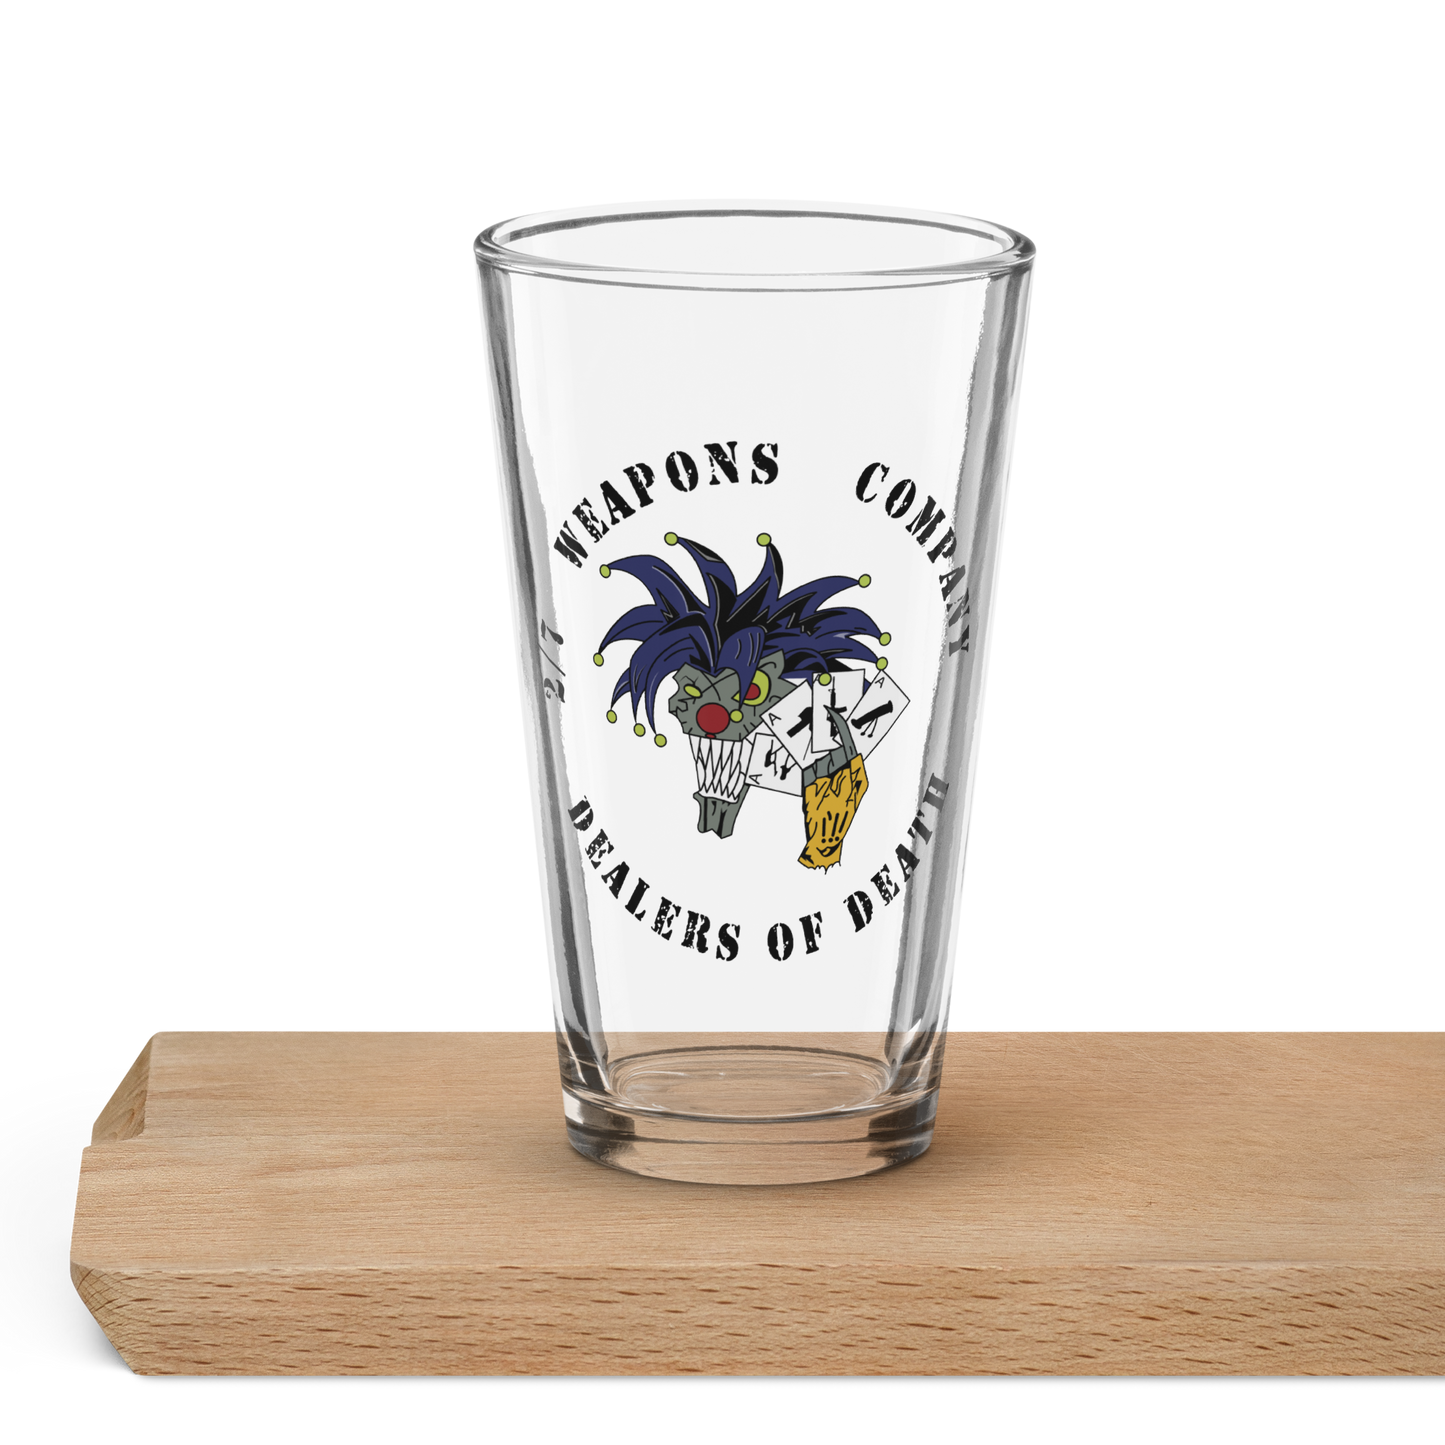 2/7 Dealers of Death Pint Glass